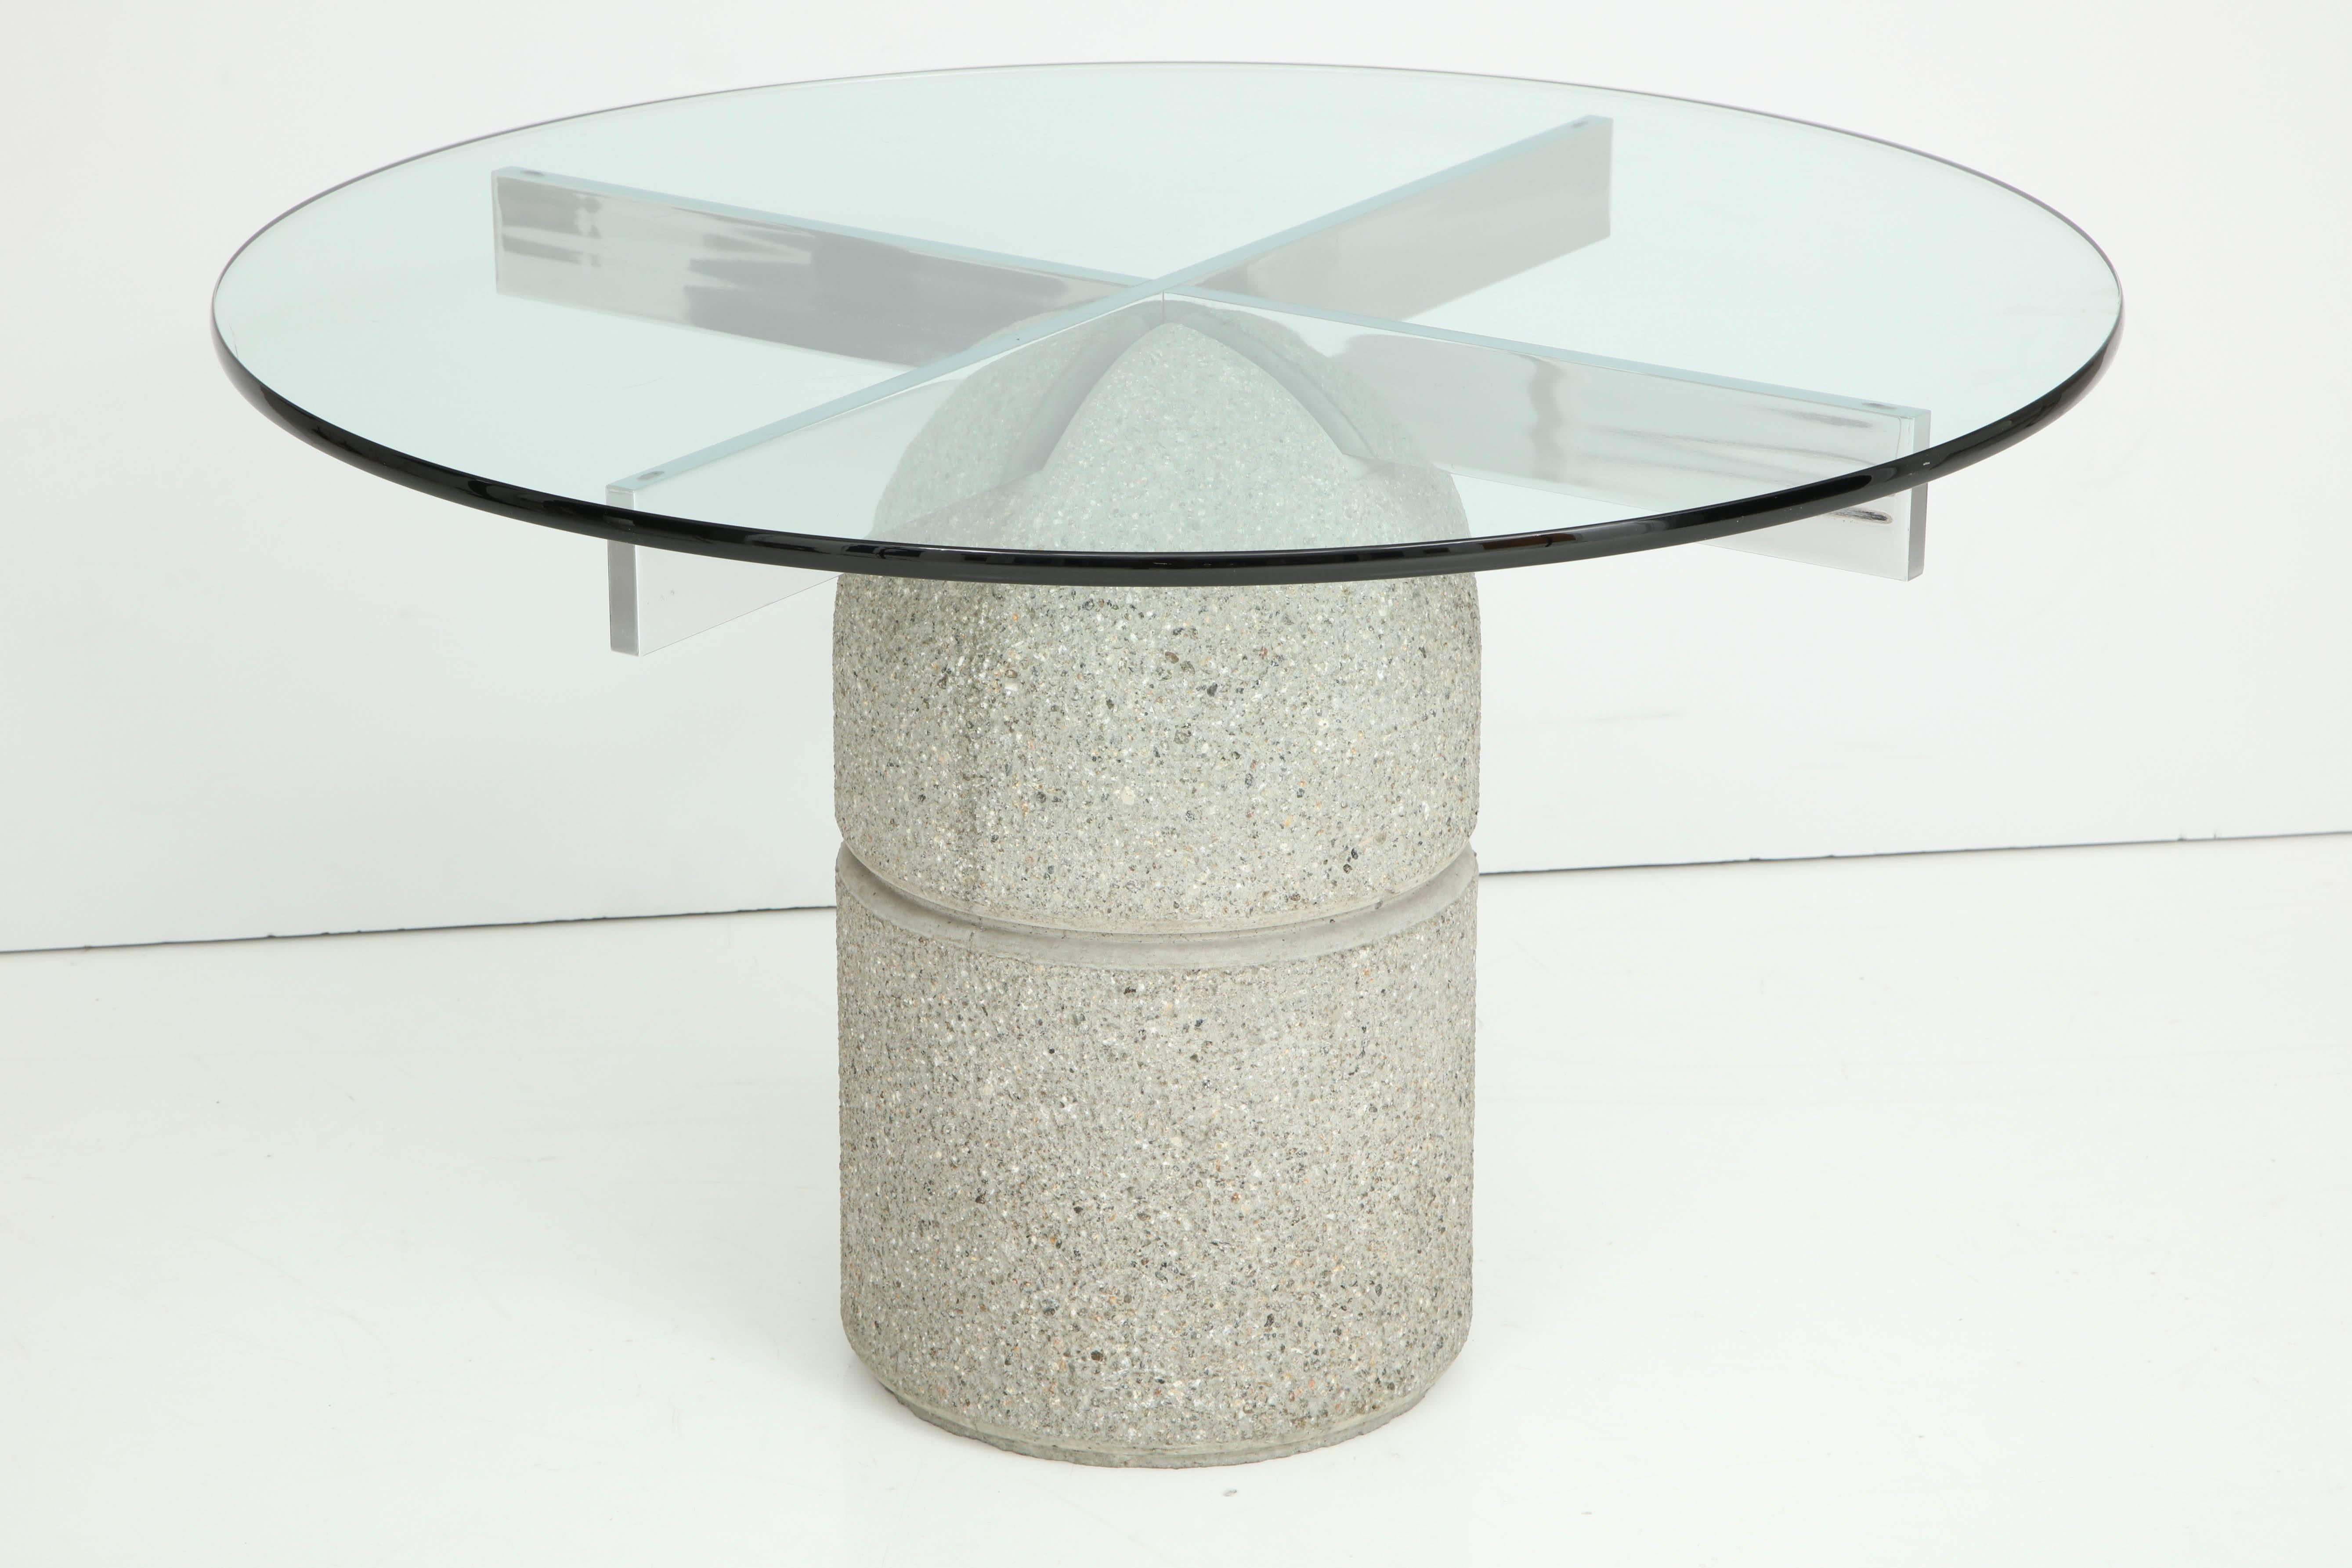 1970's concrete dining table designed by Giovanni Offredi for Saporiti Italia.
The dome shaped concrete base has a chrome cross plinth to support the 
44